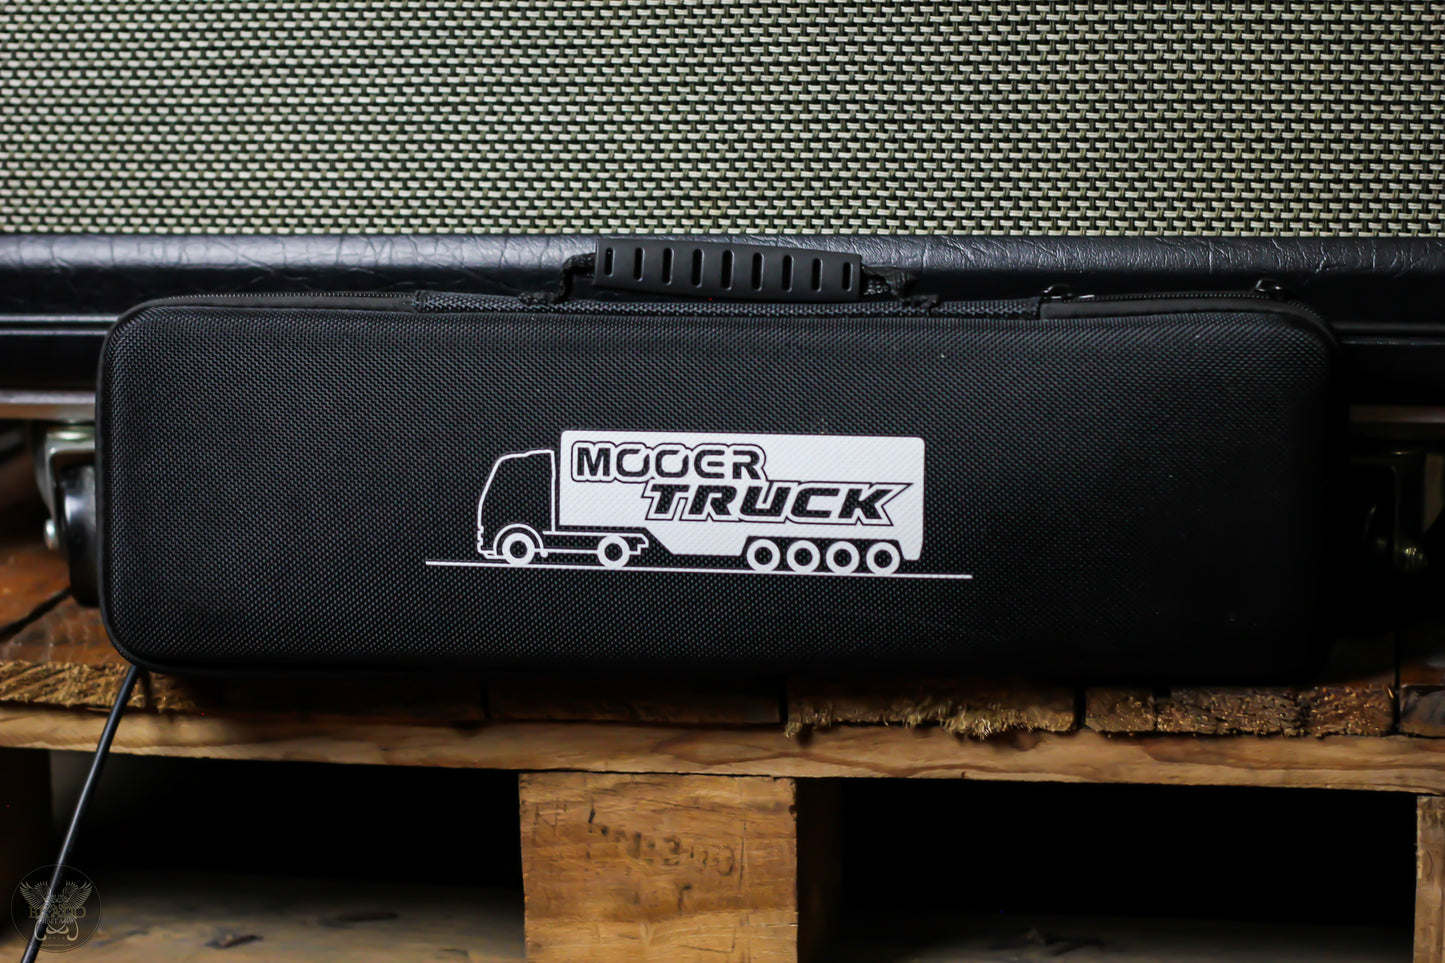 MOOER BLACK TRUCK COMBINED EFFECTS PEDAL w CASE (USED)